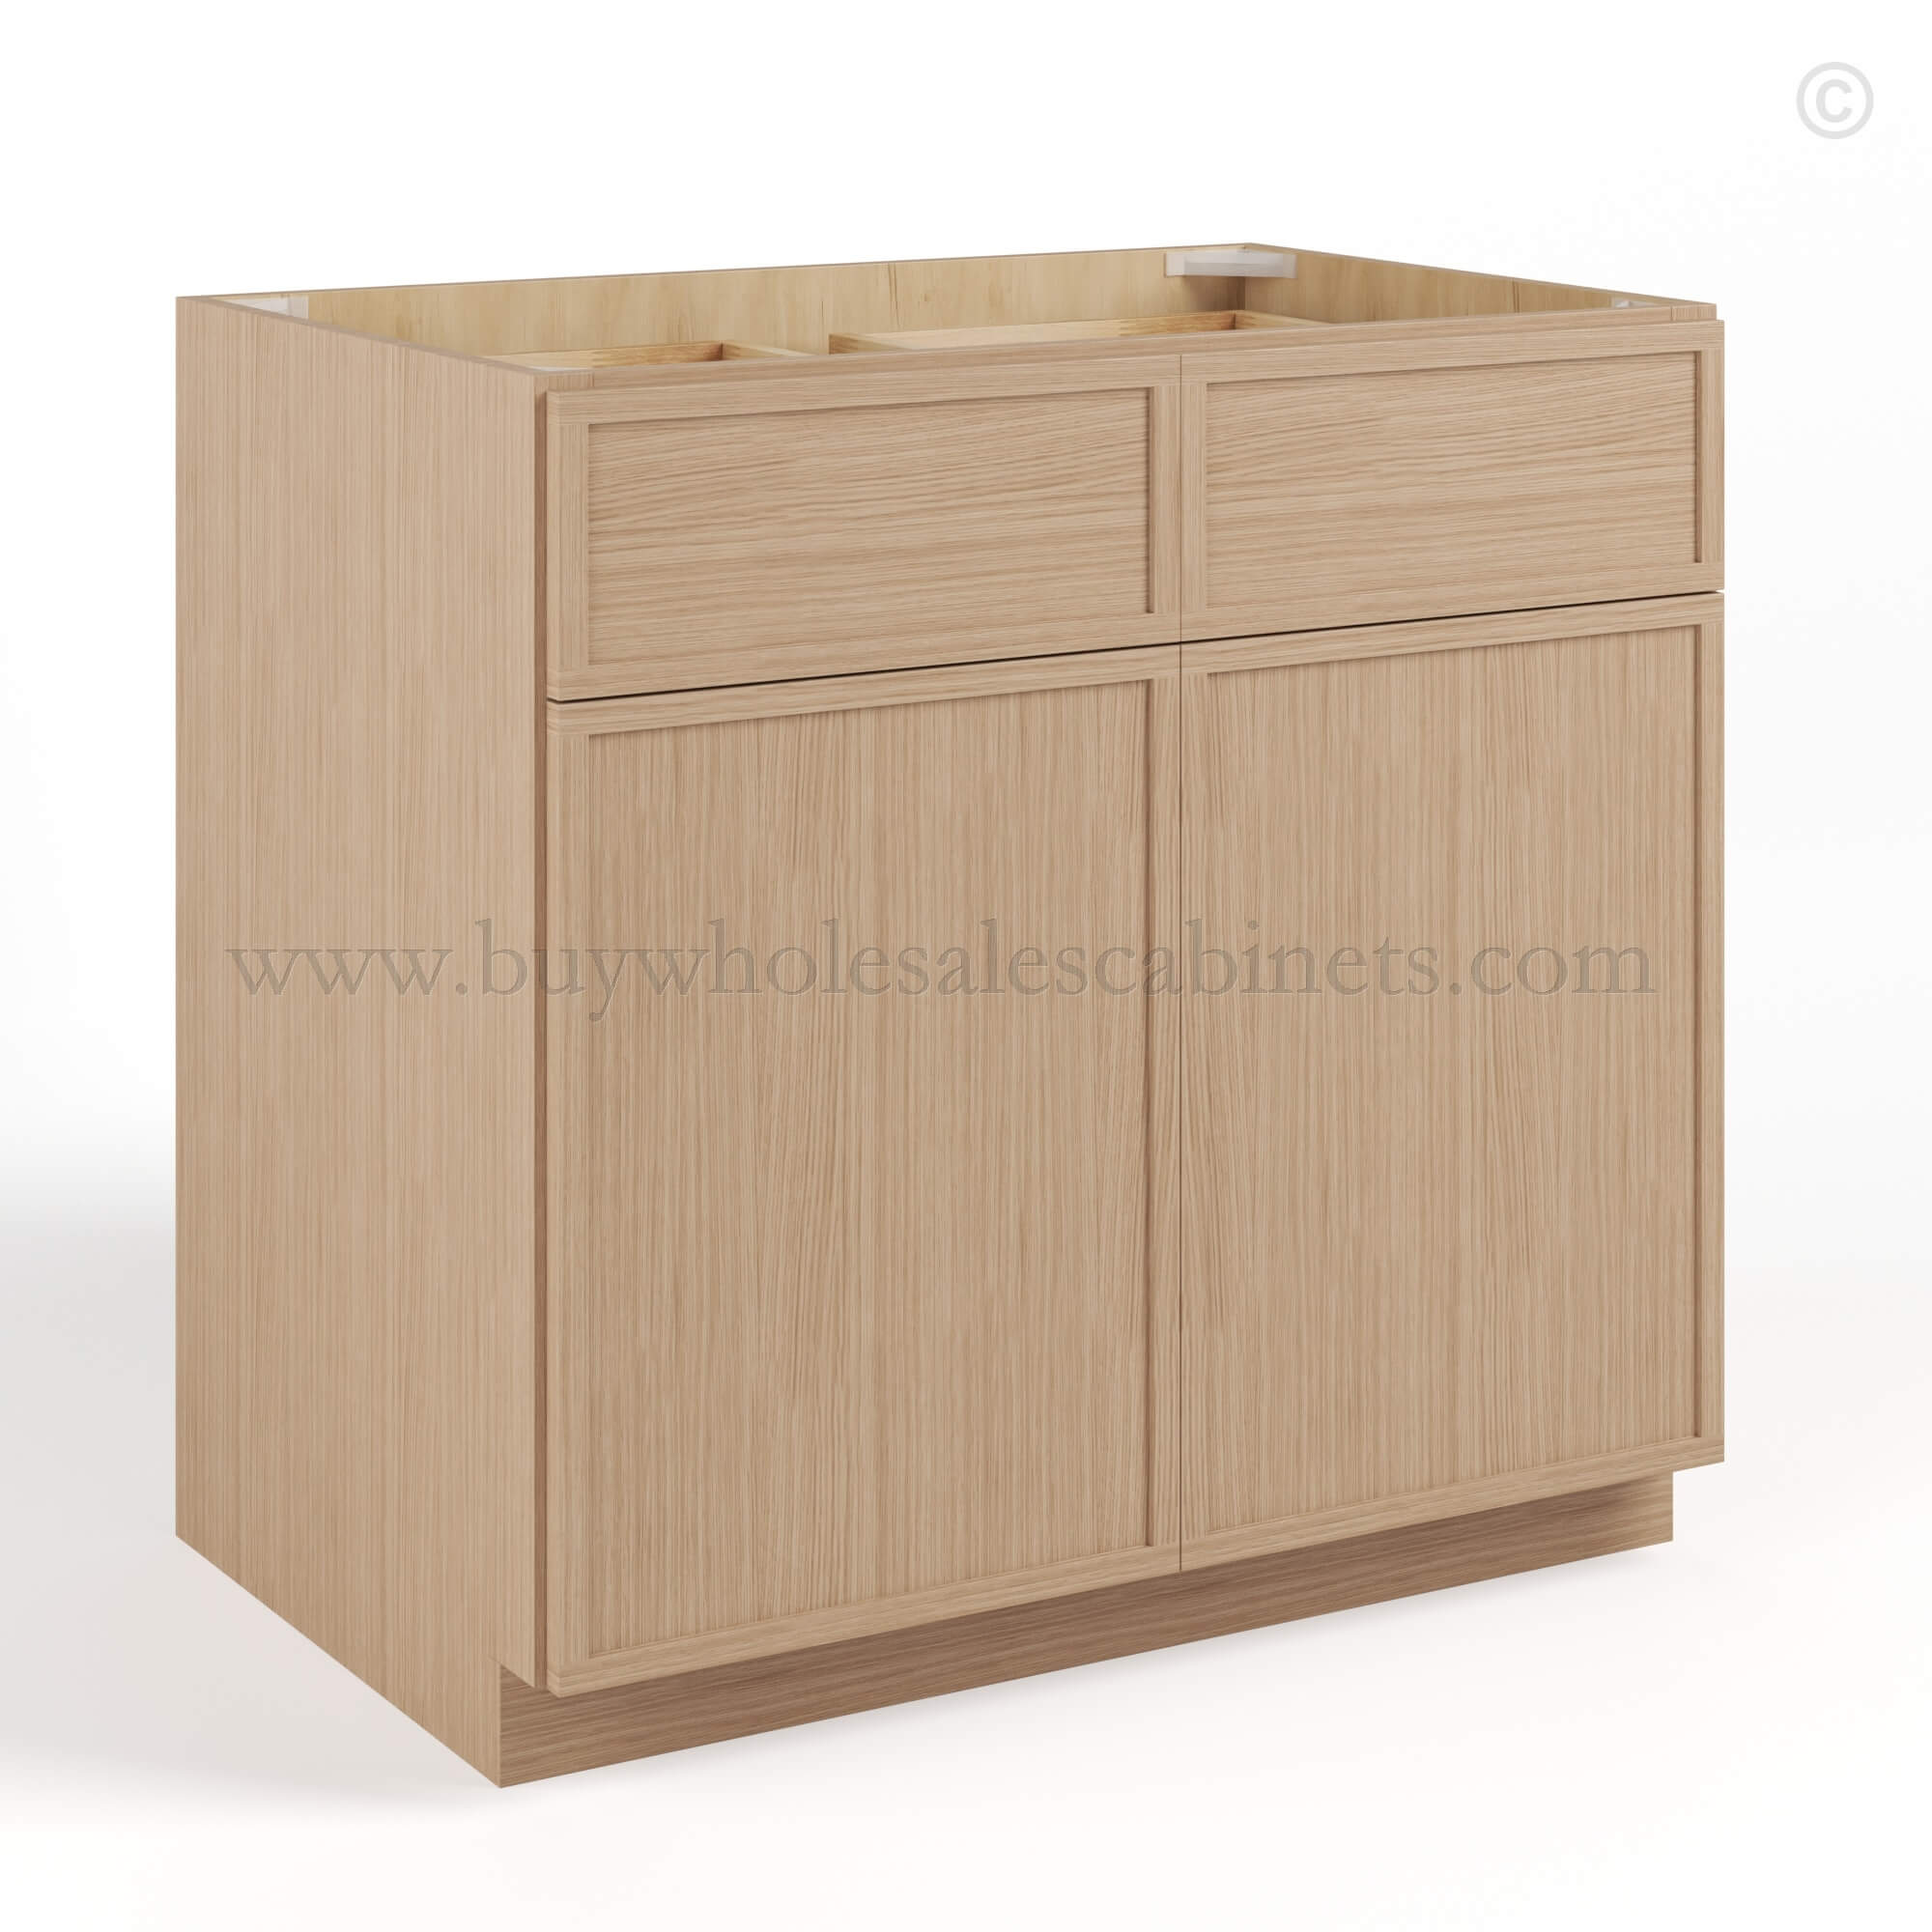 Slim Oak Shaker Base Cabinet Double Doors and Drawers, rta cabinets, wholesale cabinets